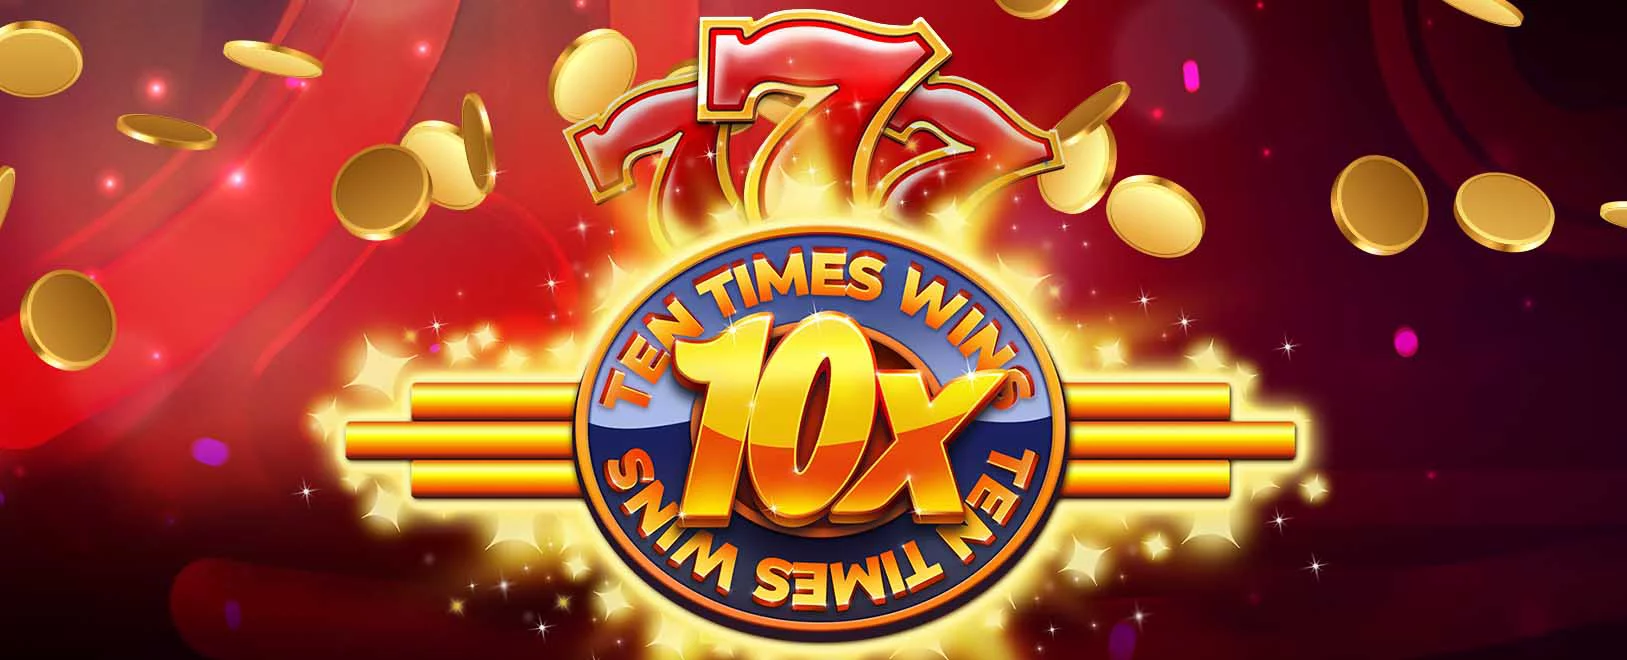 Play Slots for Real Money with 10X Wins